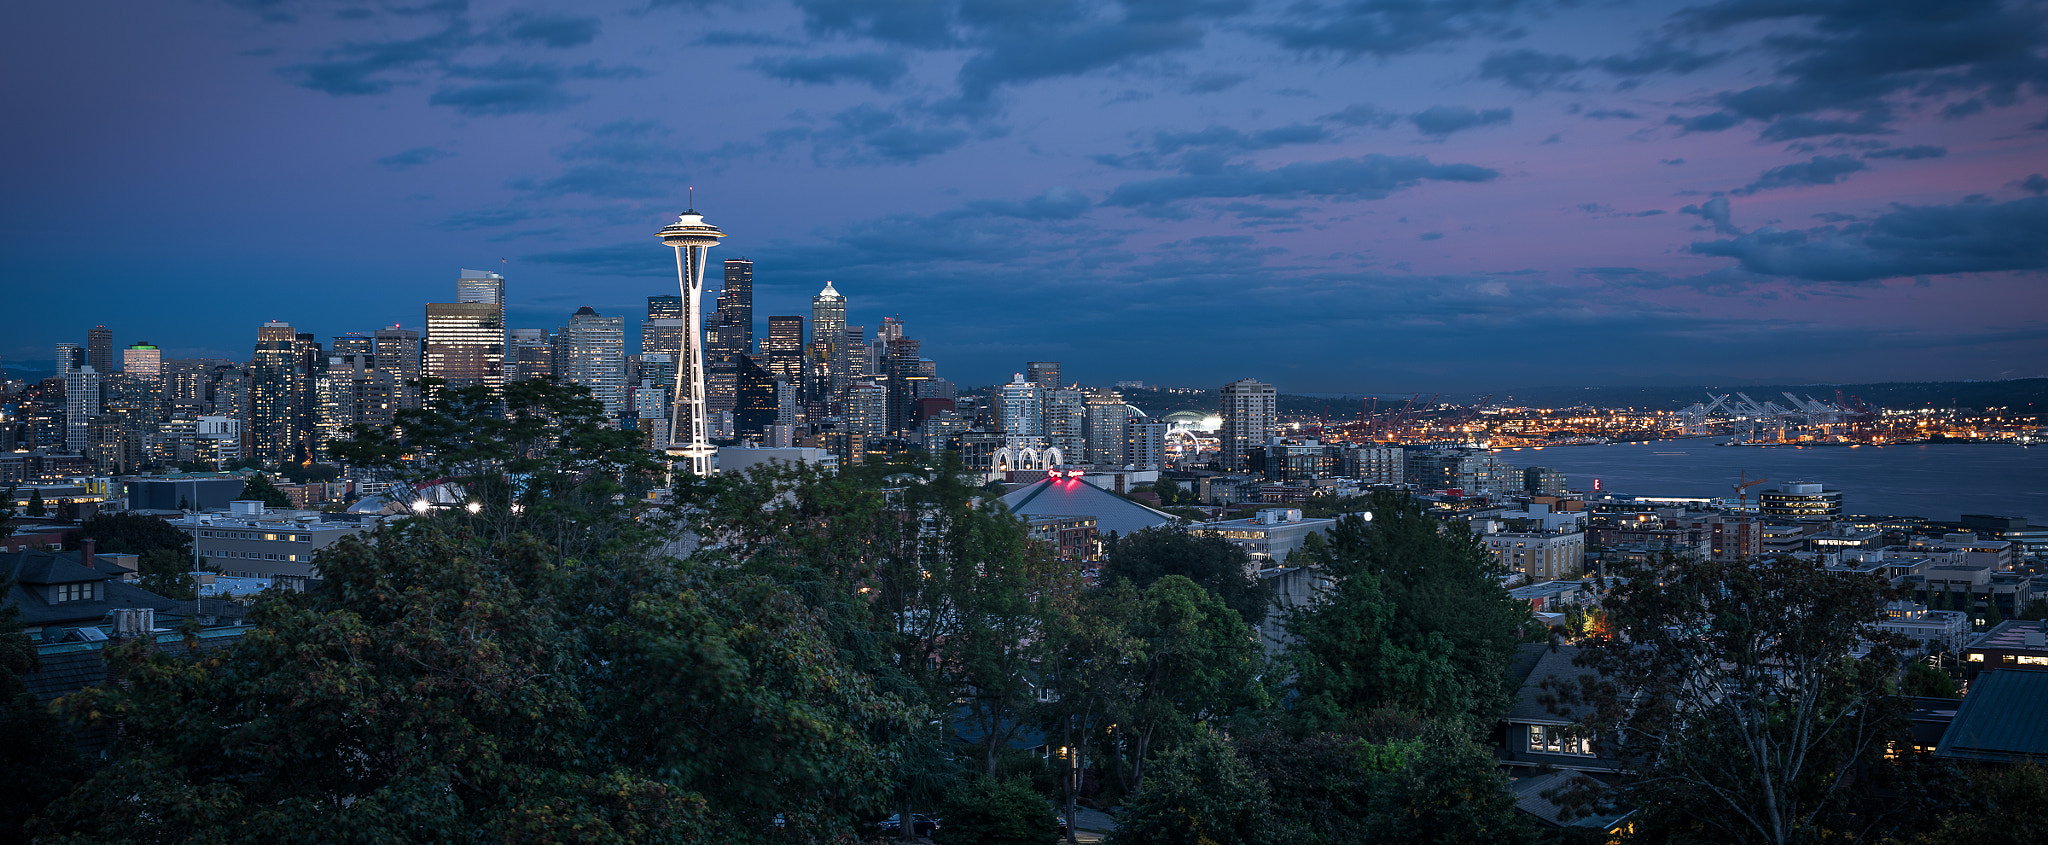 Nikon D810 sample photo. Seattle from kerry park photography